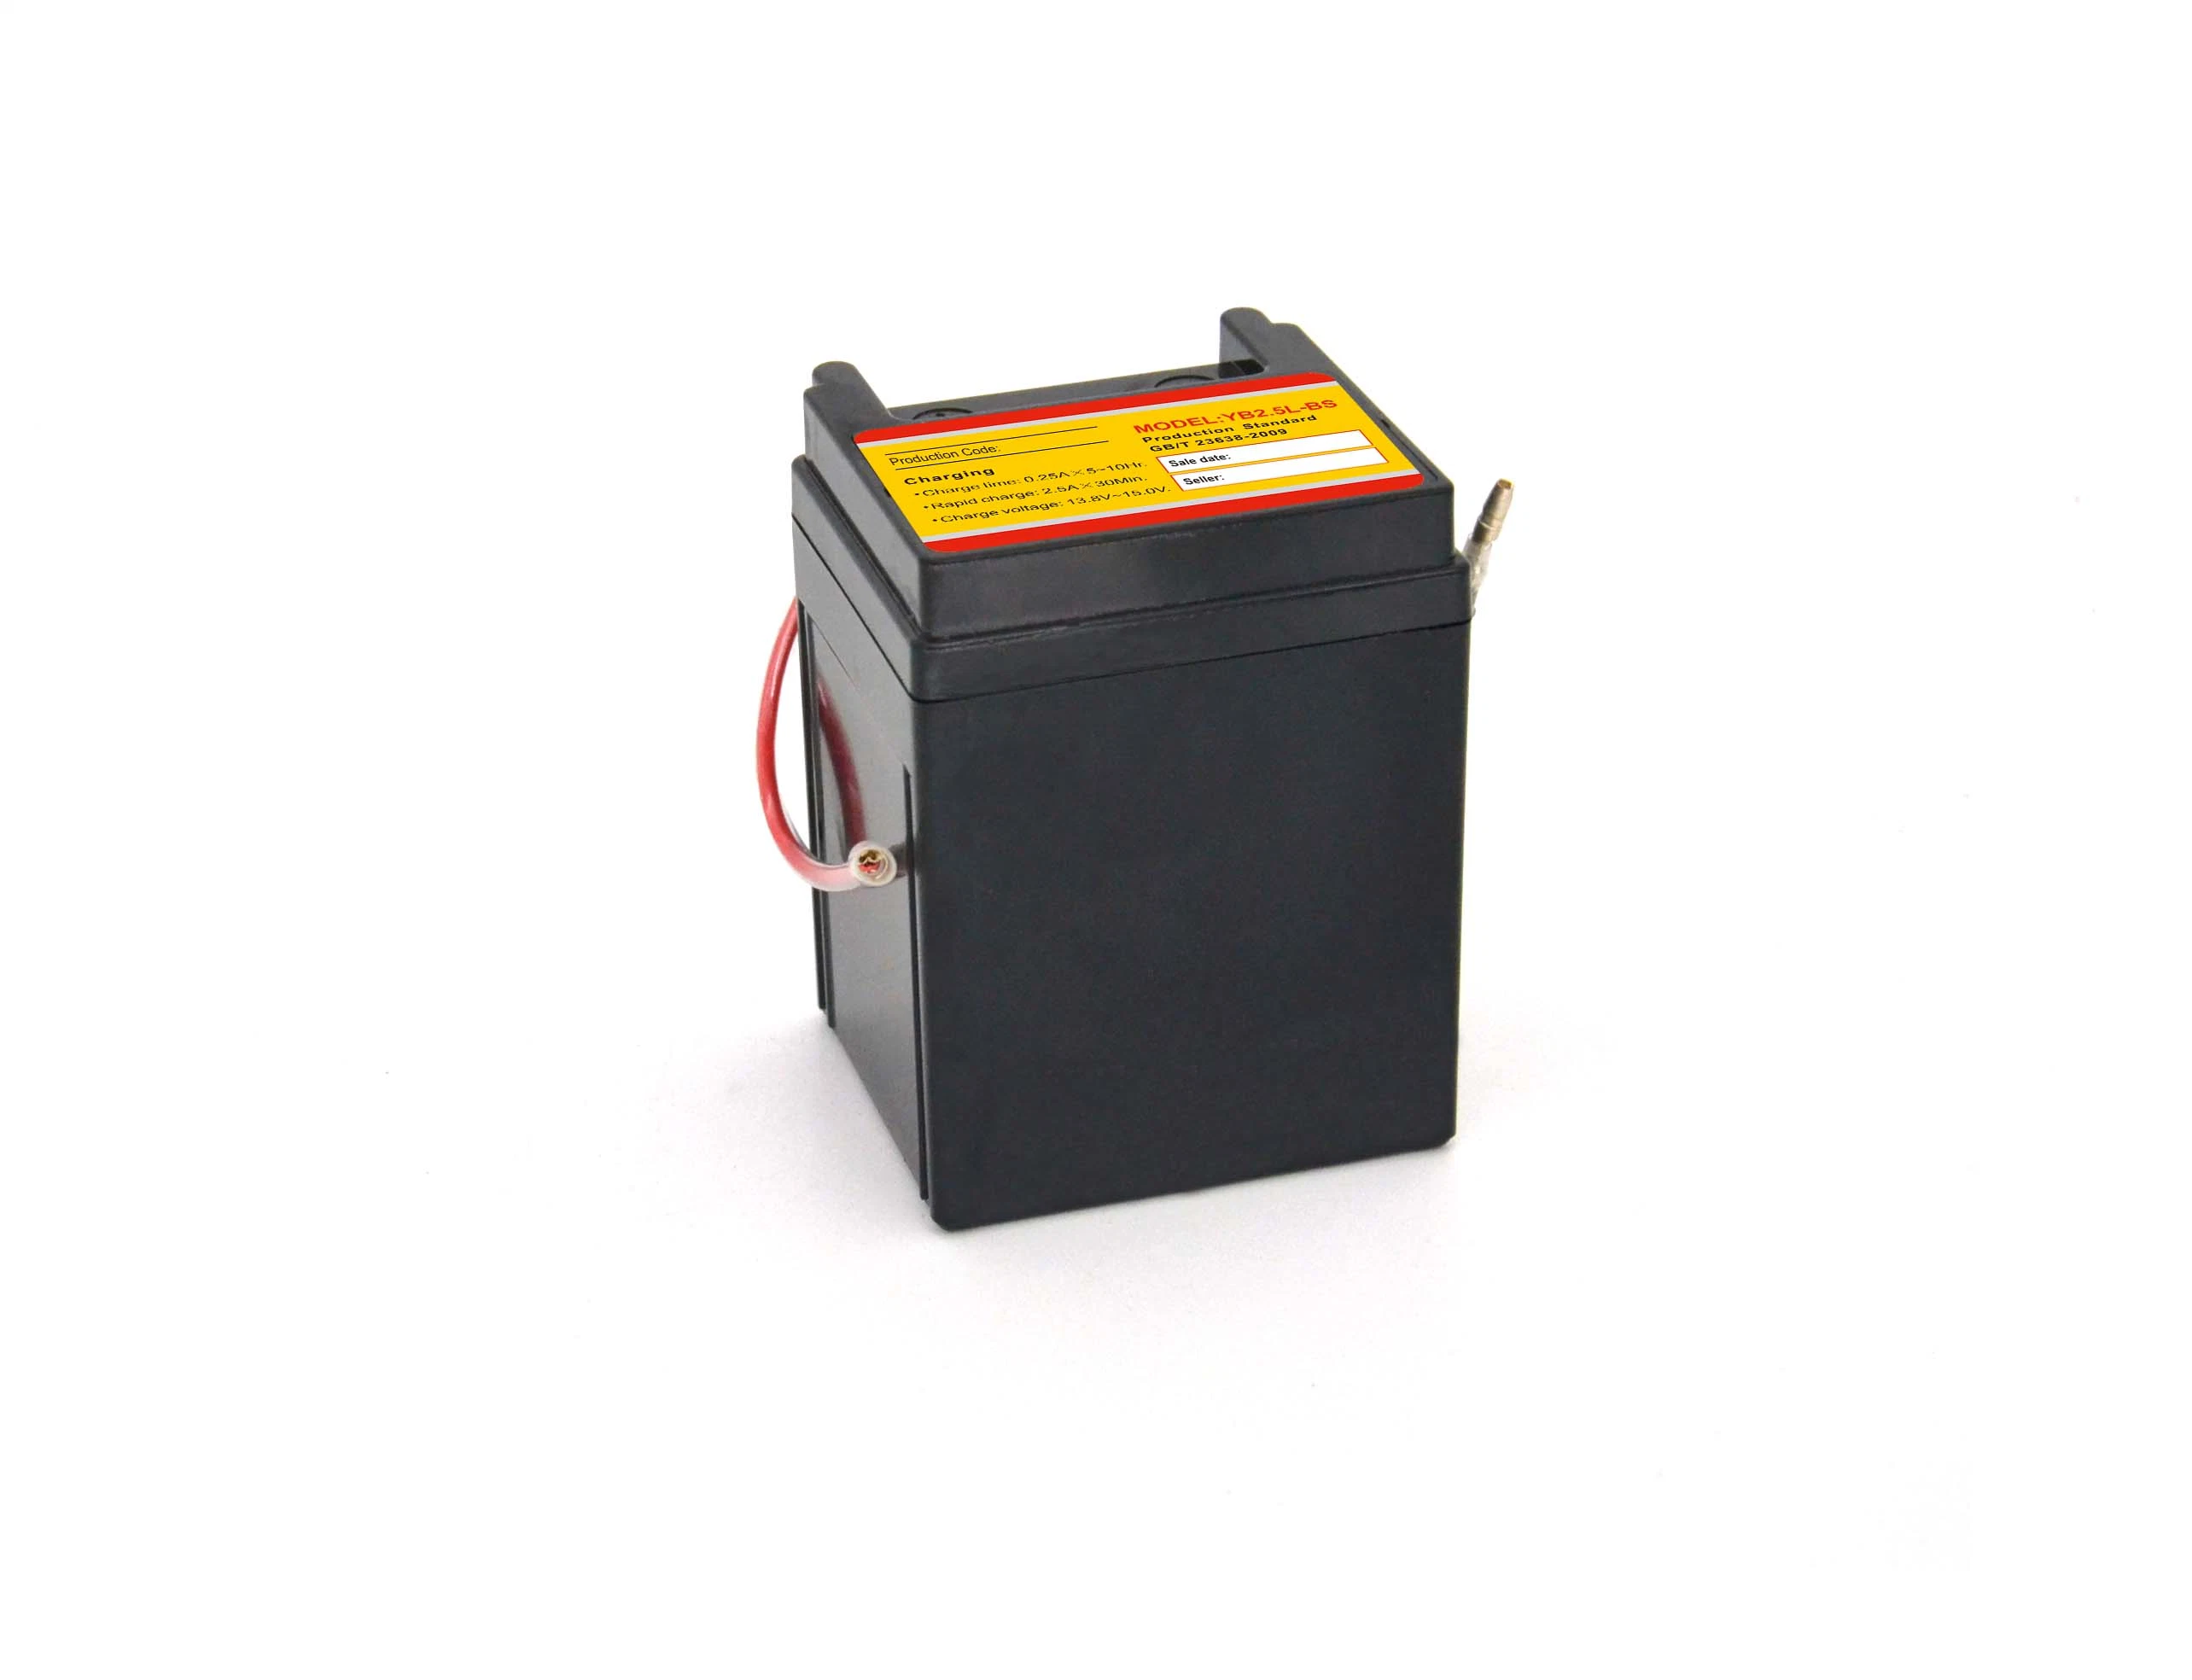 12V 2.5ah Yb2.5L-BS Outdo AGM Sealed Mf Maintenance Free Factory Activated Power Sports Starter High Performance Rechargeable Lead Acid Motorcycle Battery